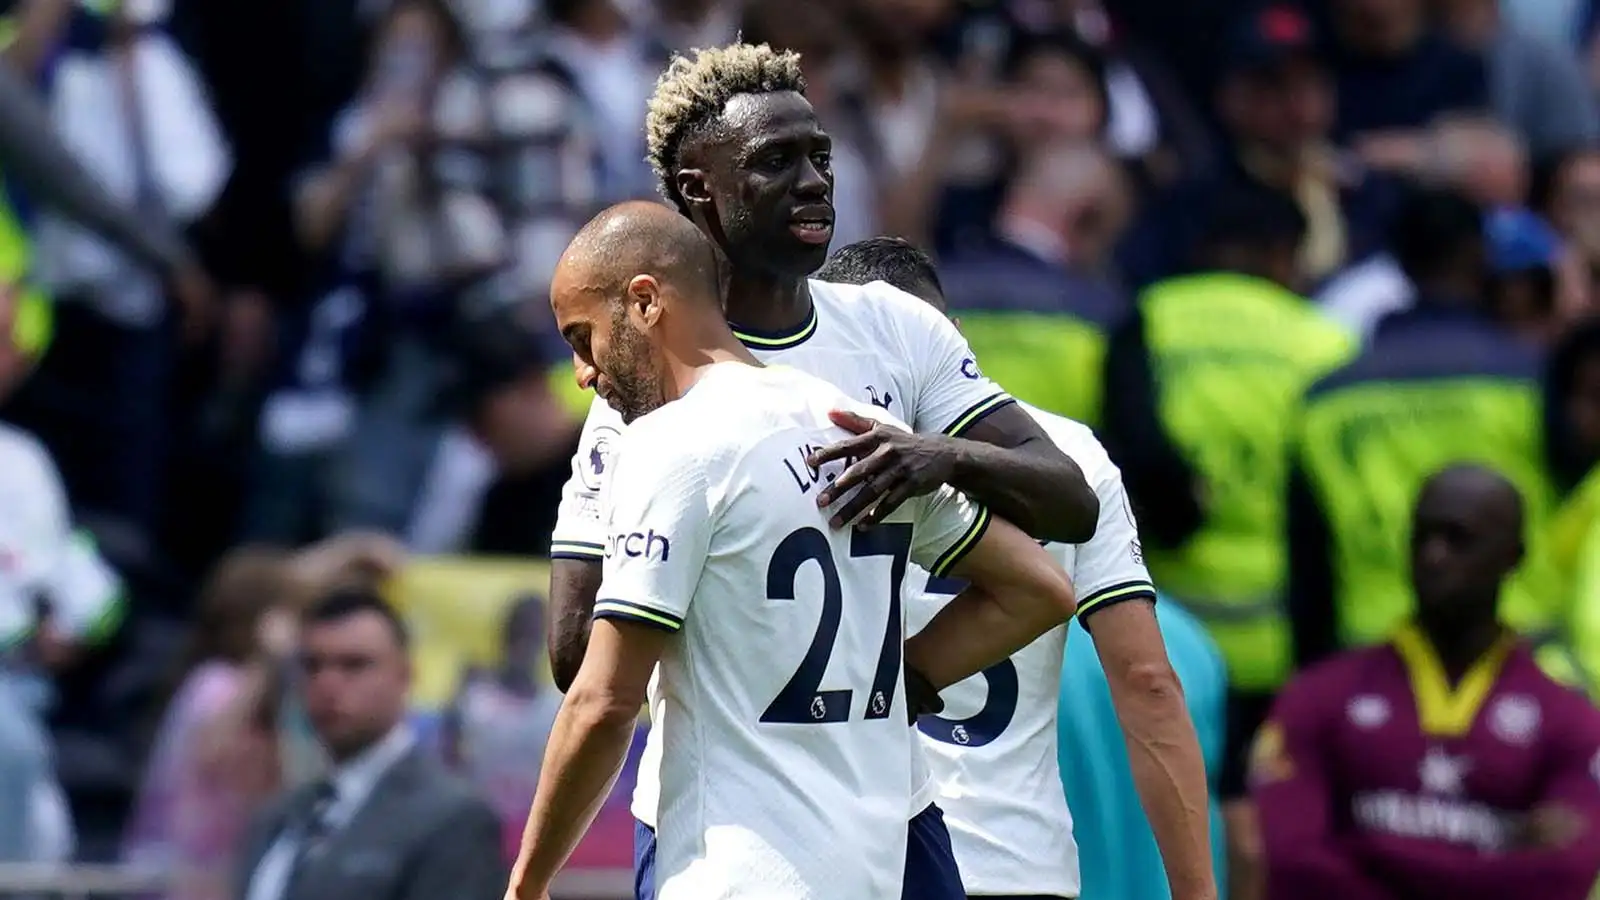 Tottenham Hotspur's Lucas Moura hugs team-mate Davinson Sanchez at the end of one of his final appearances for the club following the Premier League match at the Tottenham Hotspur Stadium, London.